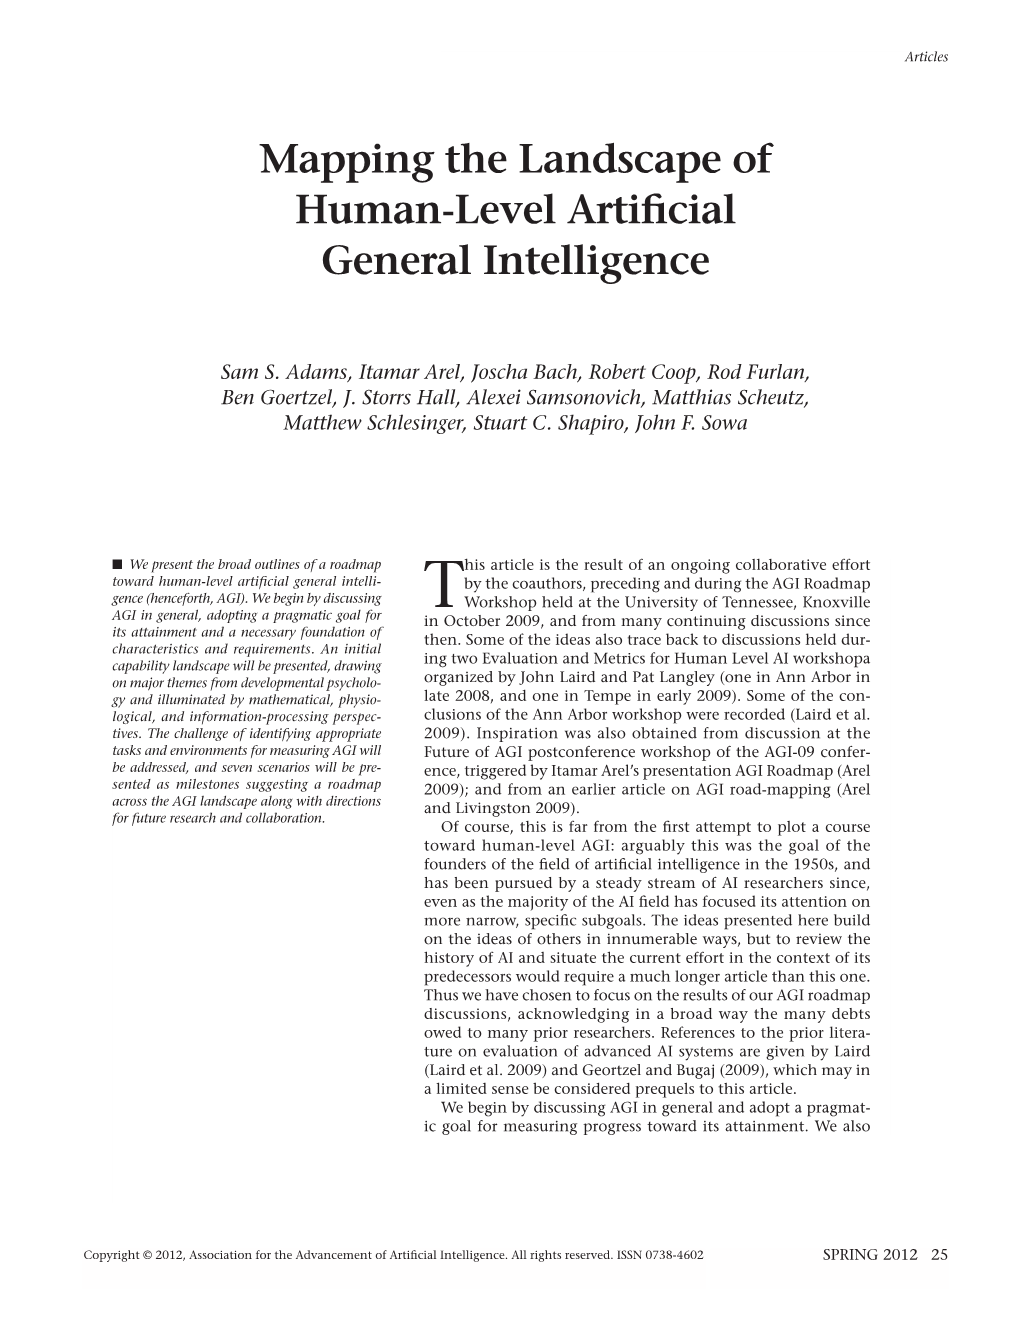 Mapping the Landscape of Human-Level Artificial General Intelligence